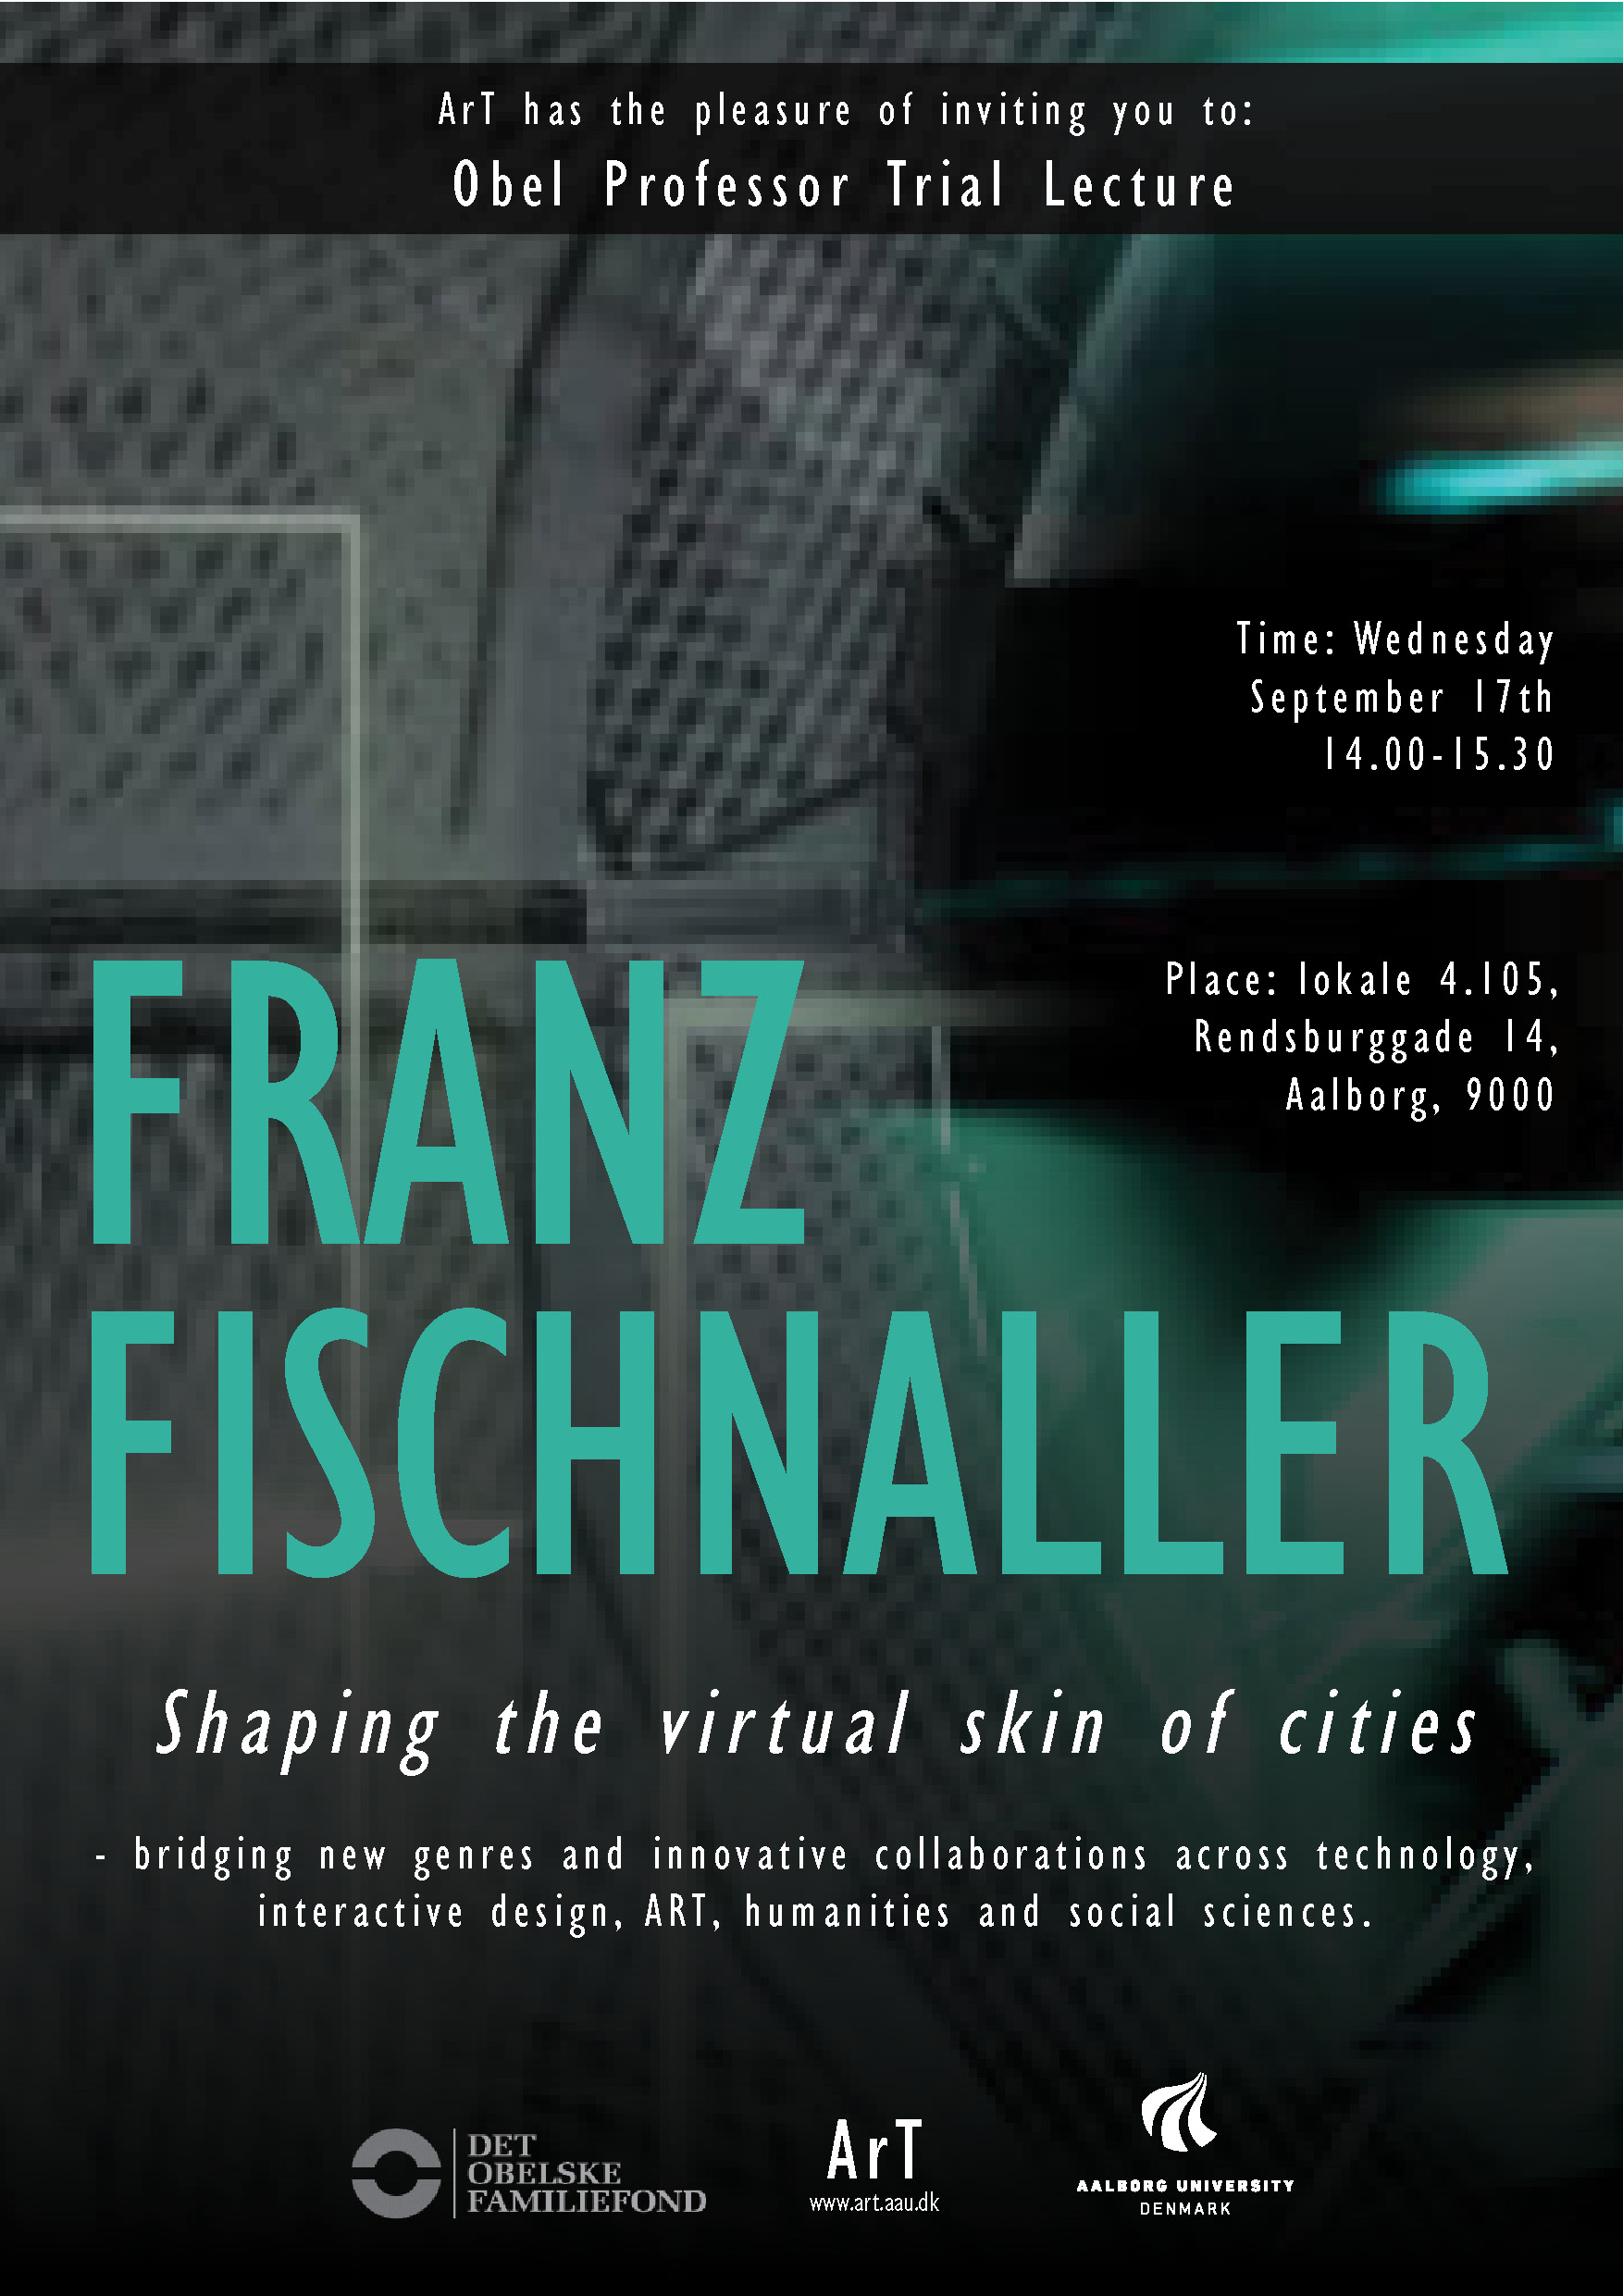 OBEL PROFESSOR TRIAL LECTURE BY FRANZ FISCHNALLER